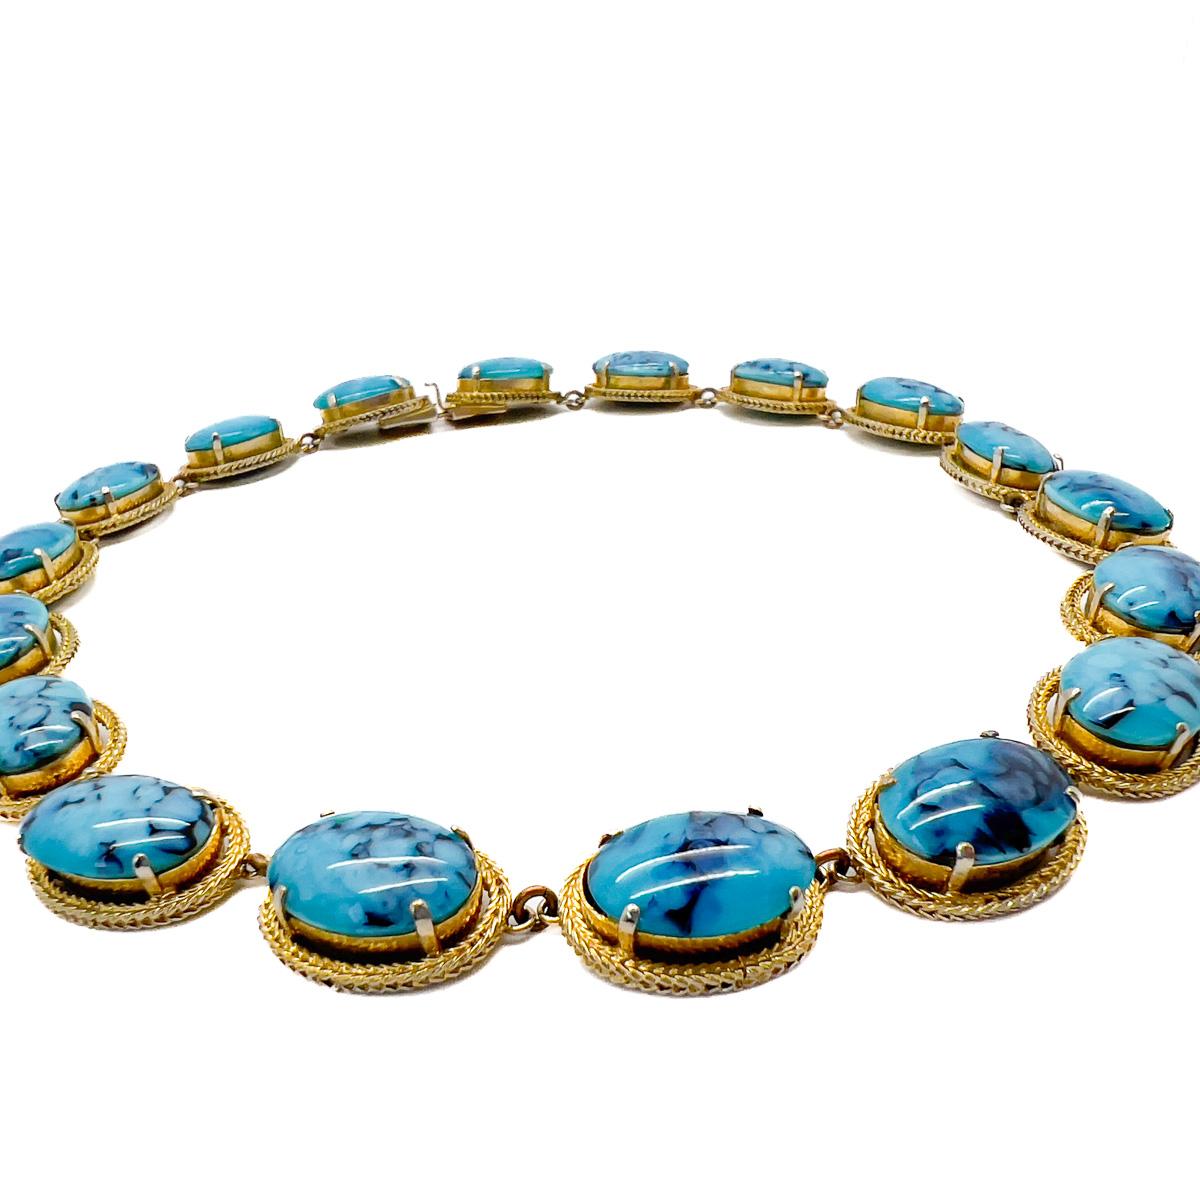 A stunning and timeless Vintage Dior Turquoise Riviere Necklace. Signed 1962.
With archive pieces from her own Dior collection displayed in London's highly acclaimed Dior Designer of Dreams Exhibition, Jennifer understands what it’s like to be on